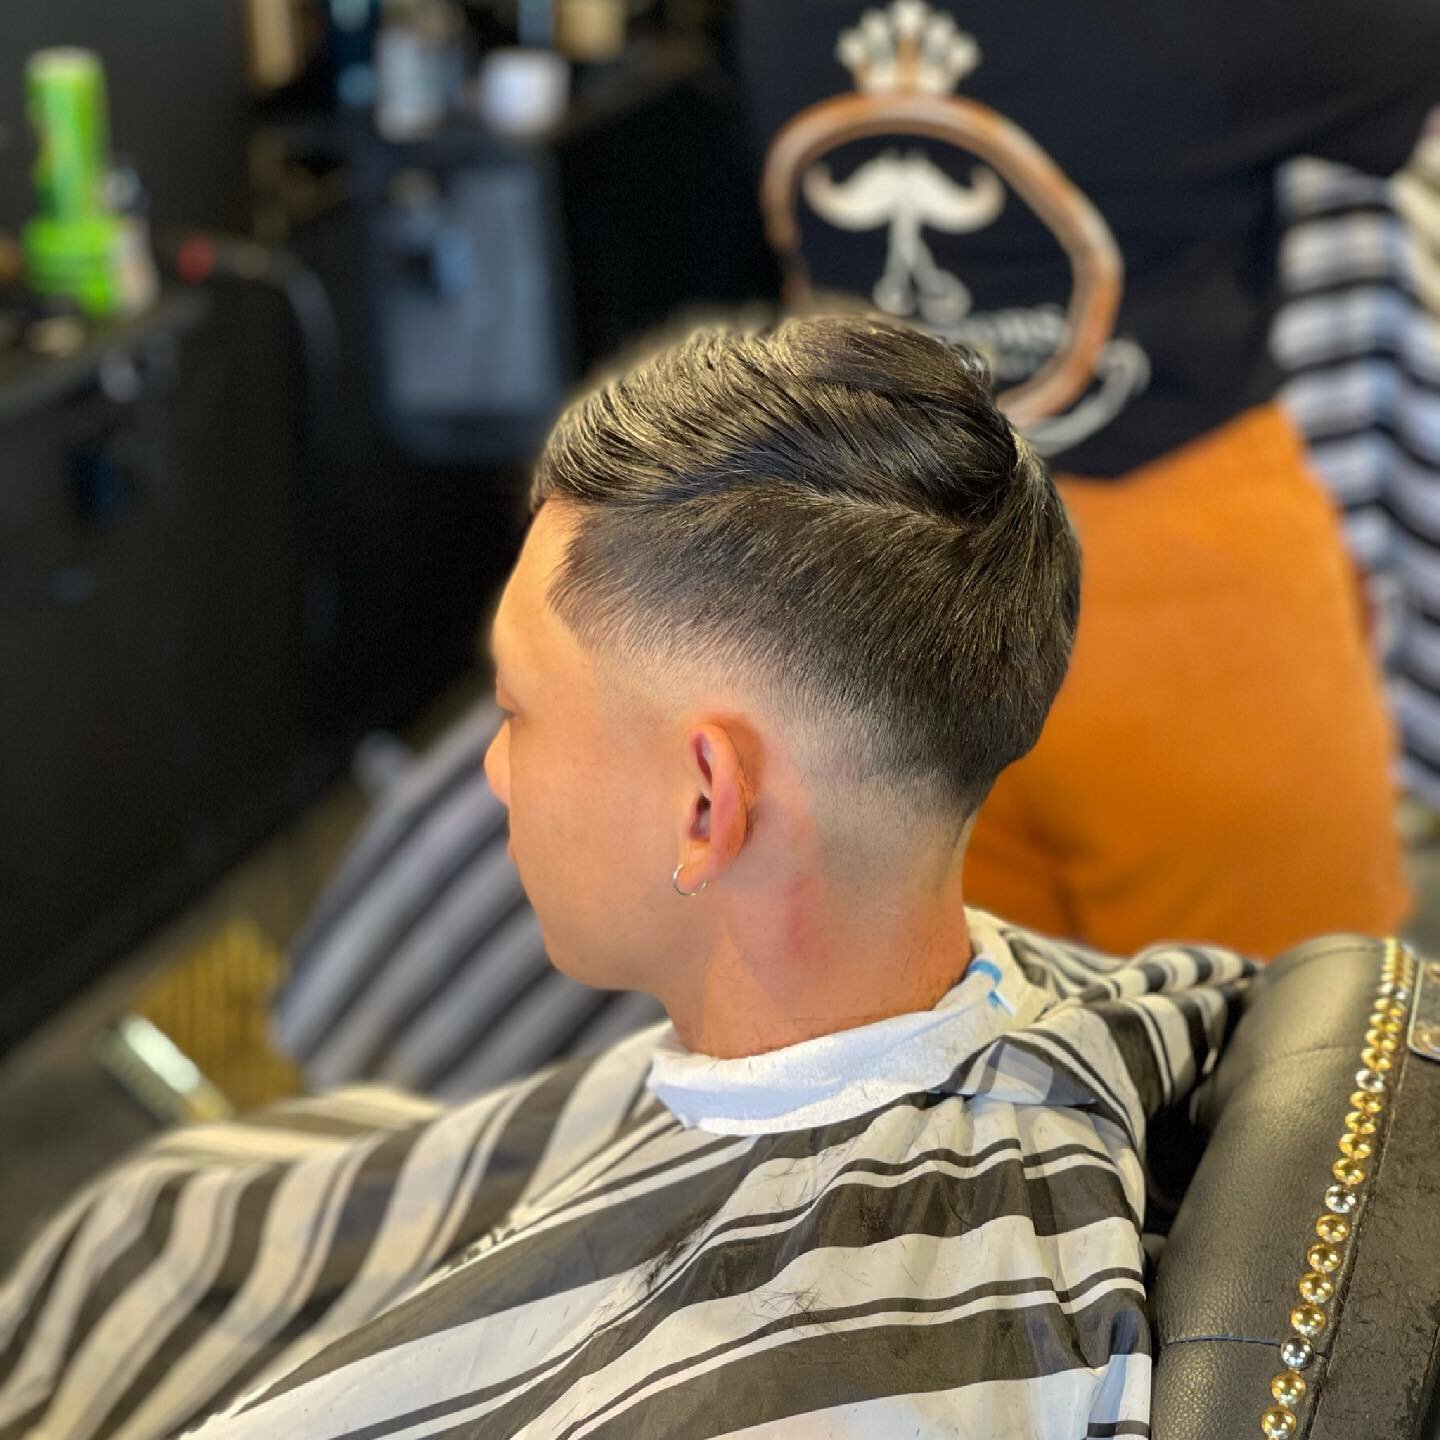 Come and see us at 
18 Bakehouse lane, Orewa

Opposite Dear Coasties and Subway 

Open 7 days a week 💈 💫 

visit our website 
www.drscissors.co.nz

#barber 
#barbershop 
#fades 
#fadesfordays 
#razorfade 
#blade 
#barbershopconnect 
#orewa 
#norths